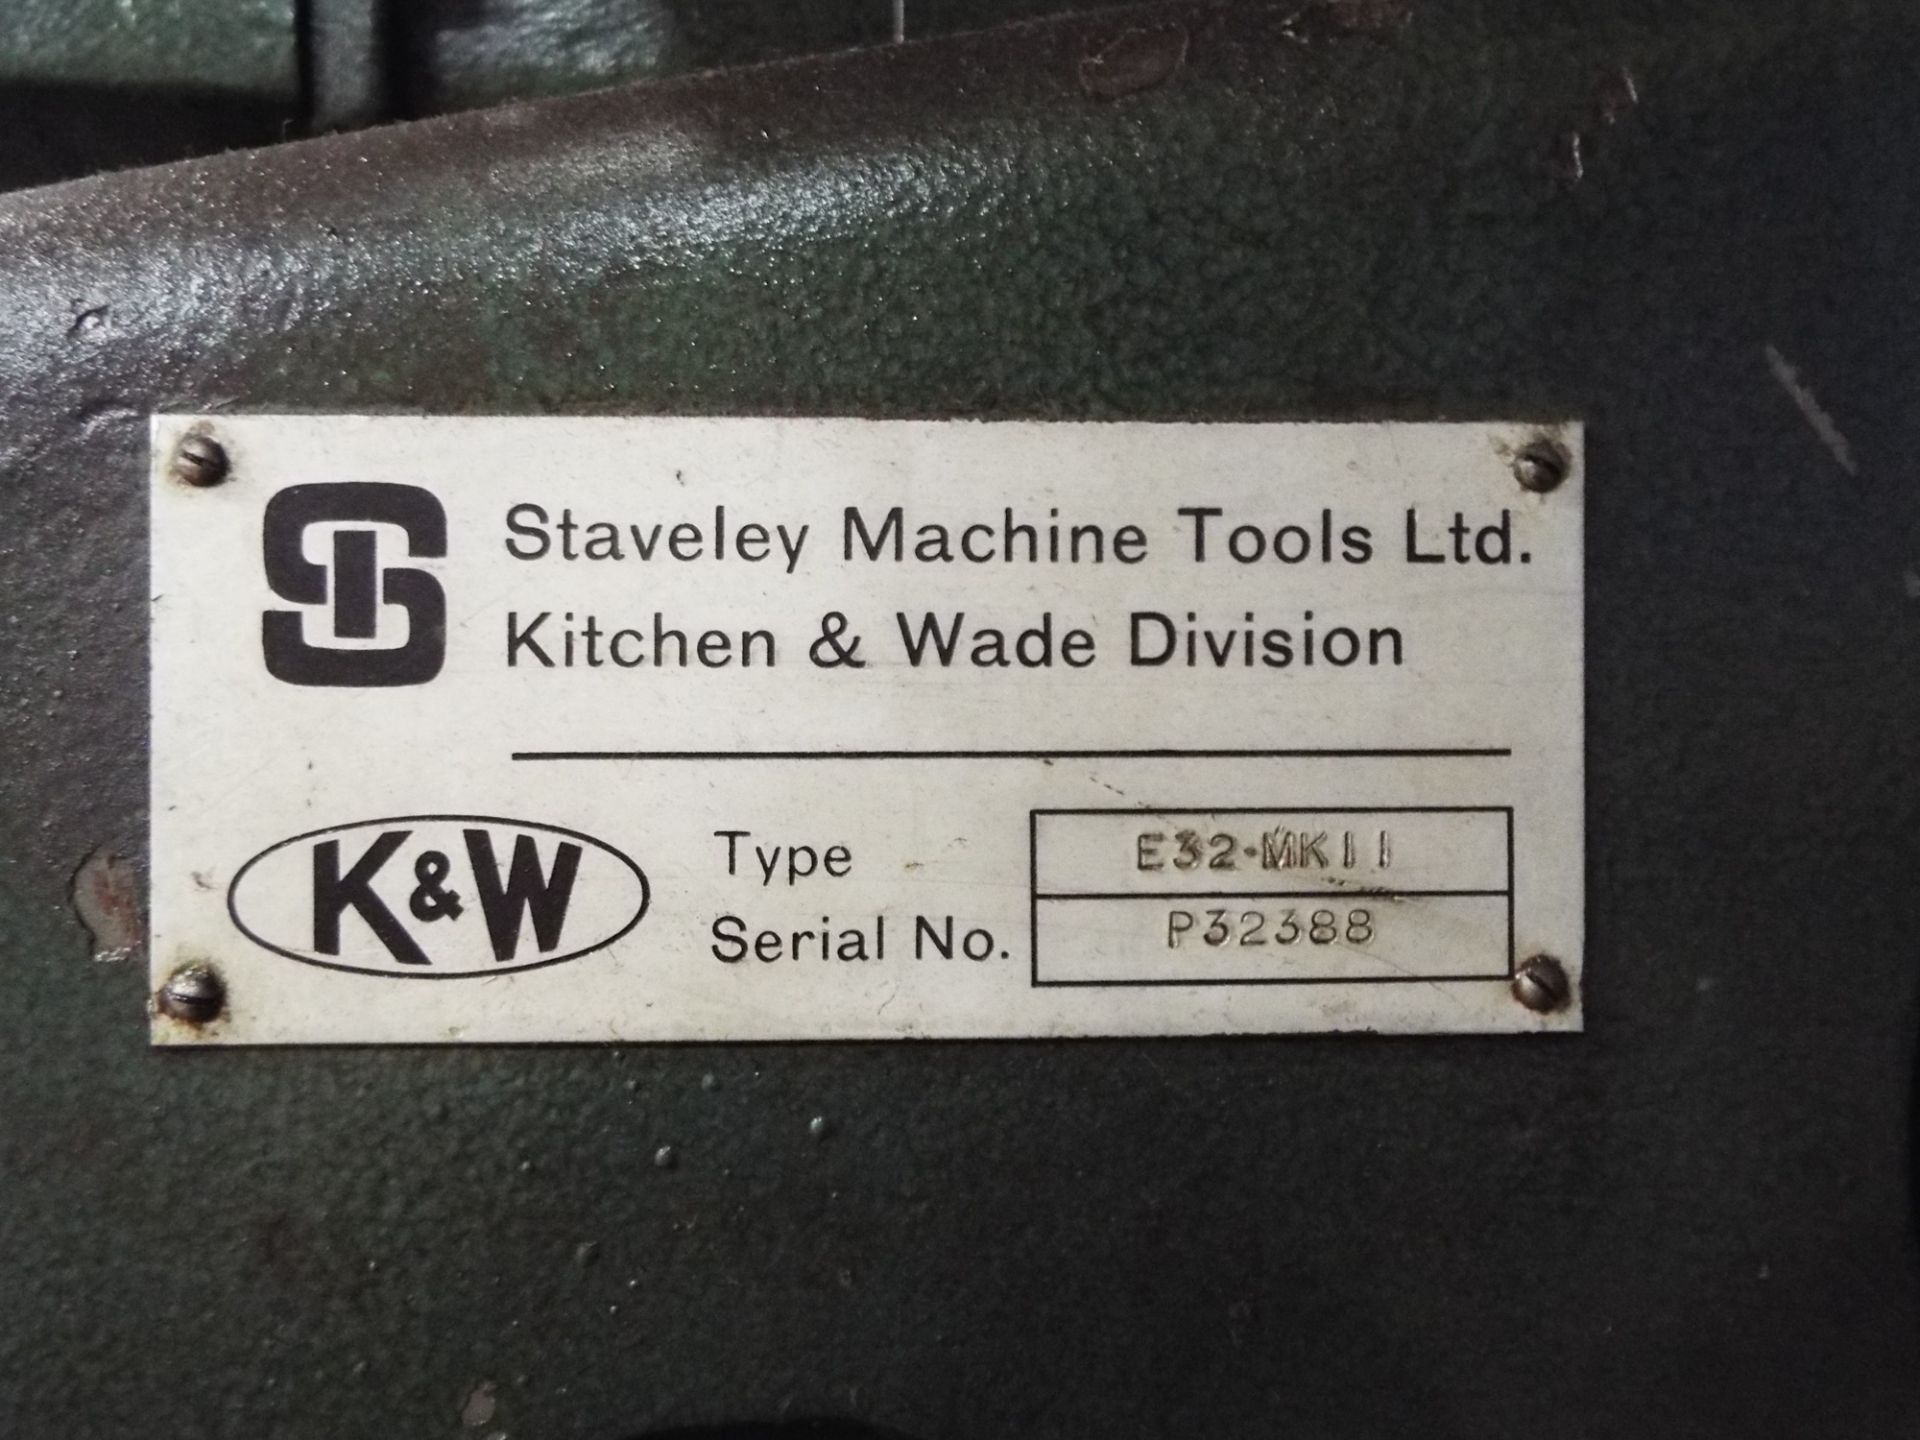 KITCHEN & WADE E32 MARK II MODEL 12/54 5' RADIAL ARM DRILL WITH 1600 RPM, 28" COLUMN TRAVEL, S/N: - Image 3 of 3